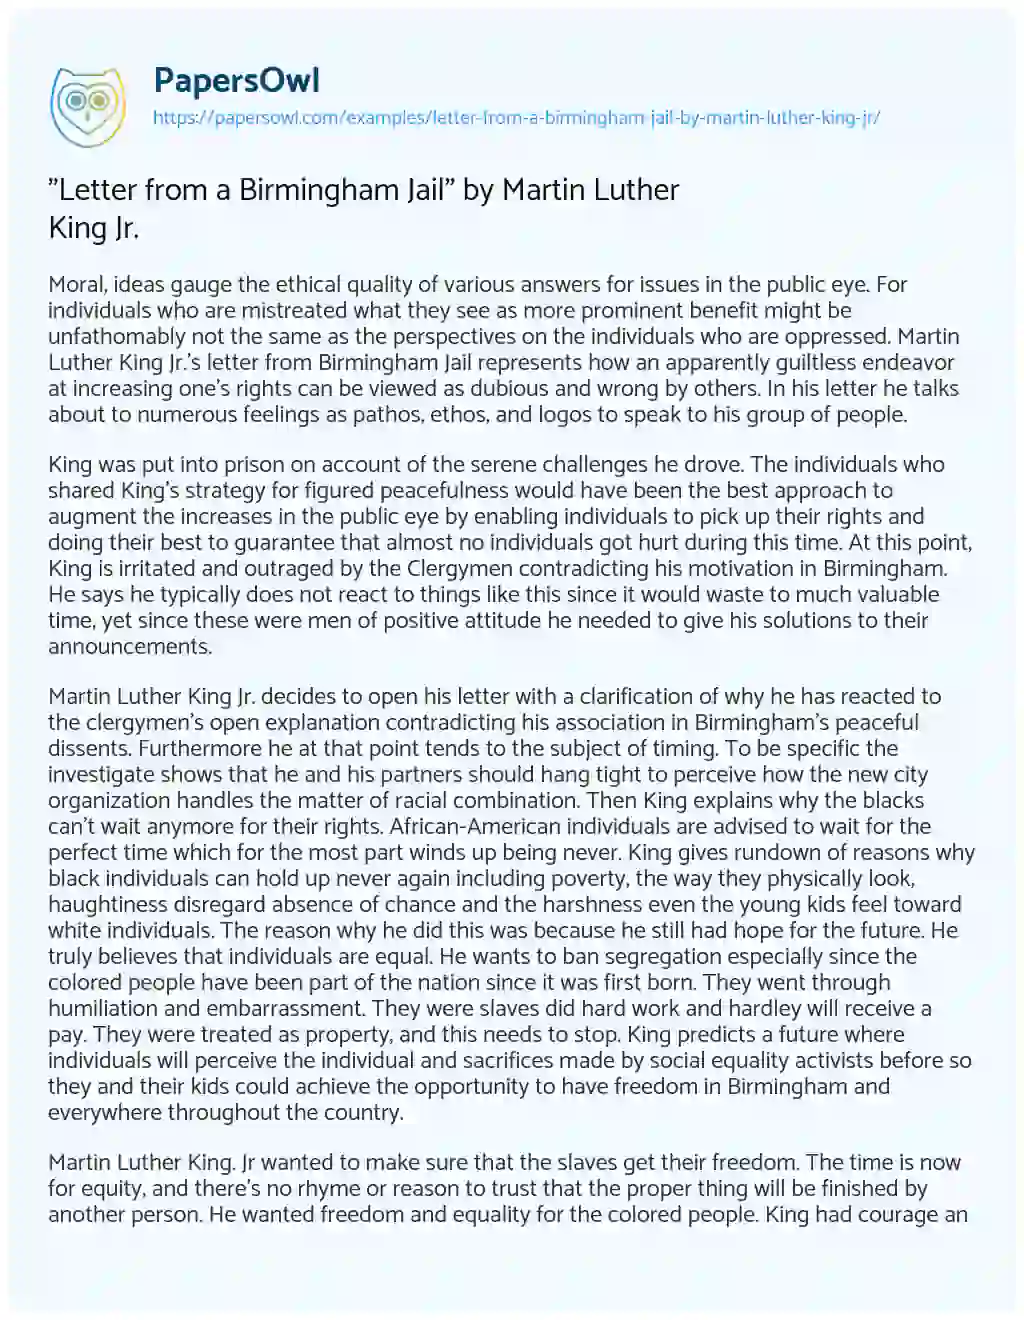 “Letter from a Birmingham Jail” by Martin Luther King Jr. essay